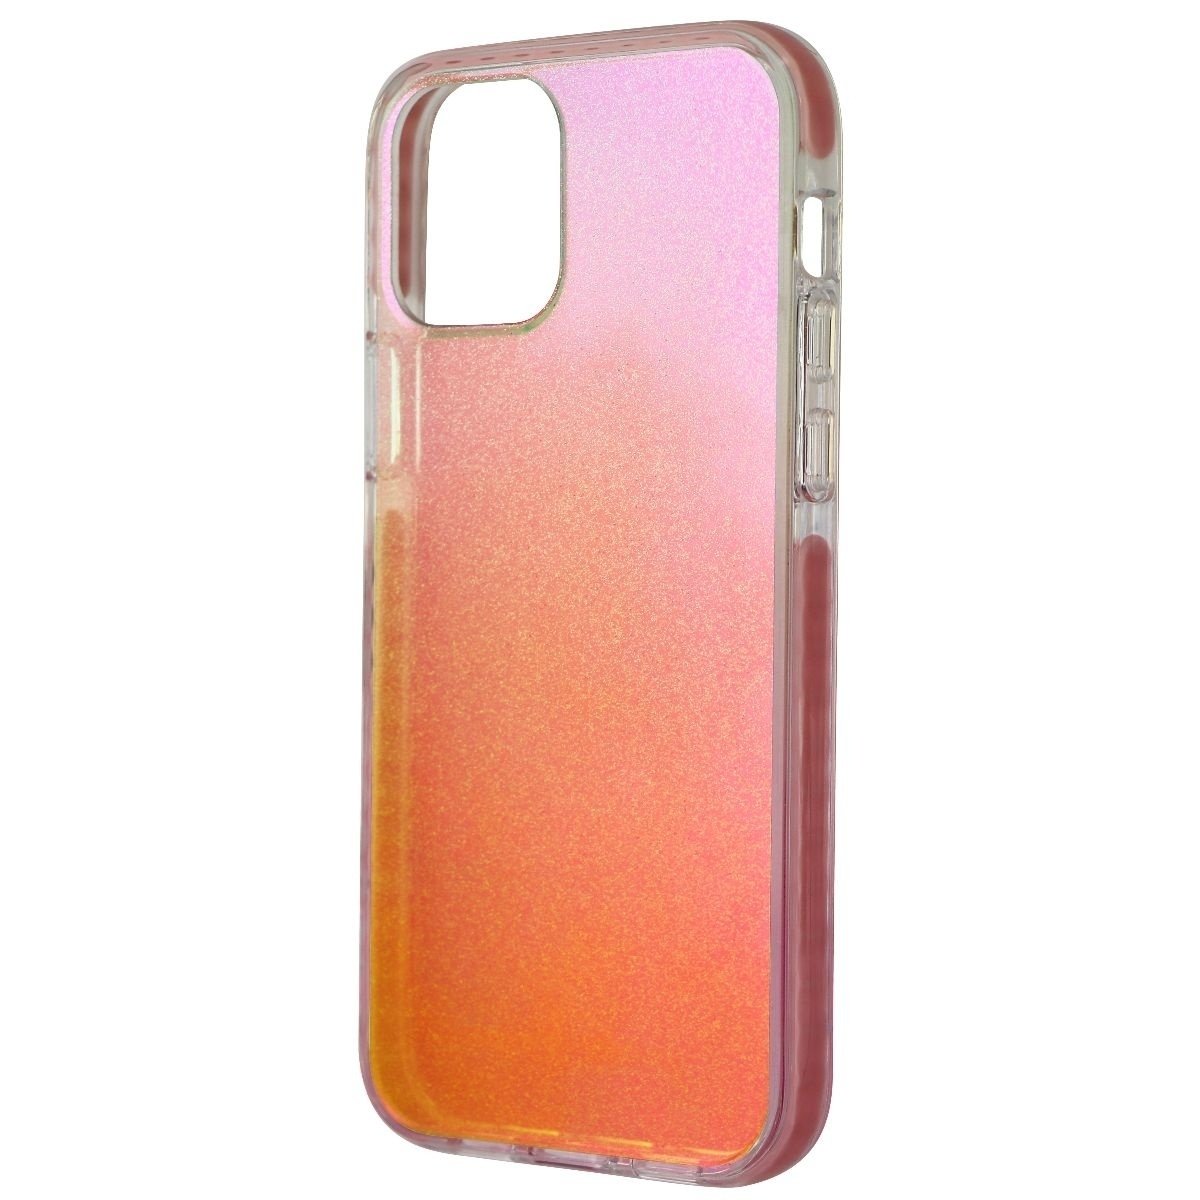 AQA Slim Case For Apple IPhone 12 And IPhone 12 Pro - Yellow/Red Glitter